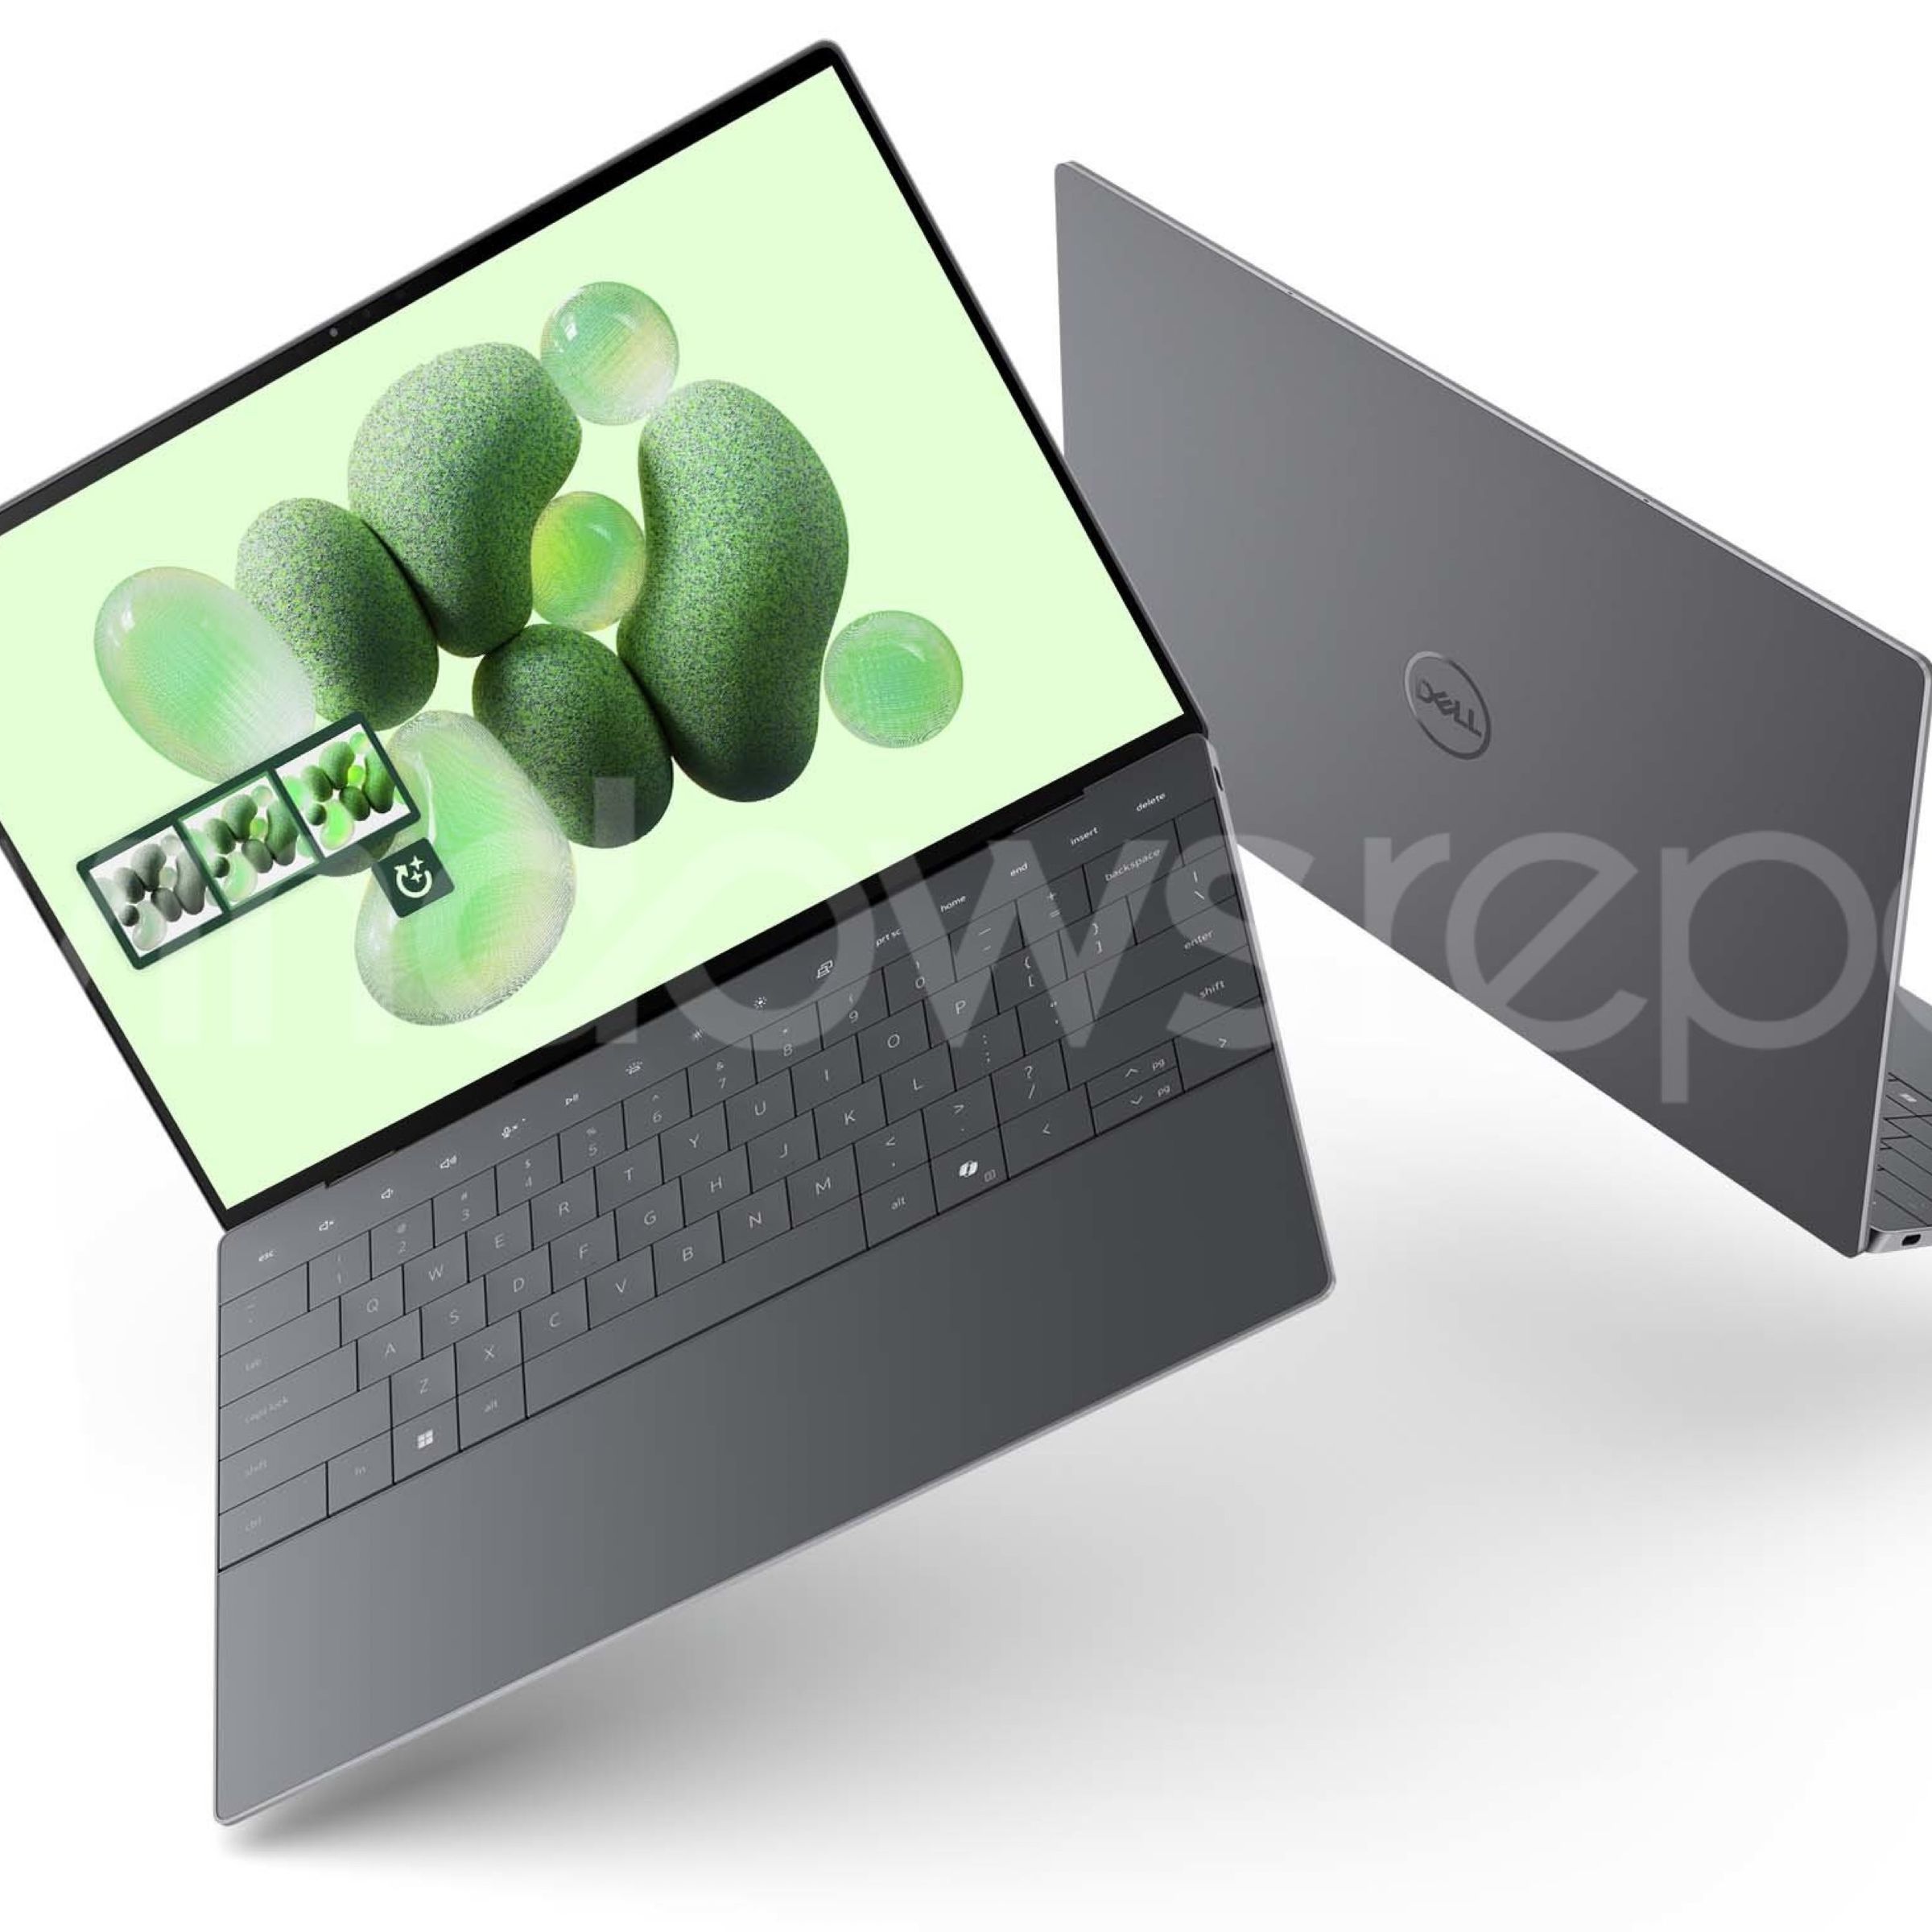 dell laptops floating back to back and opened showing slimness, green wallpaper screen with balloons, there's a copilot key on the bottom keyboard row